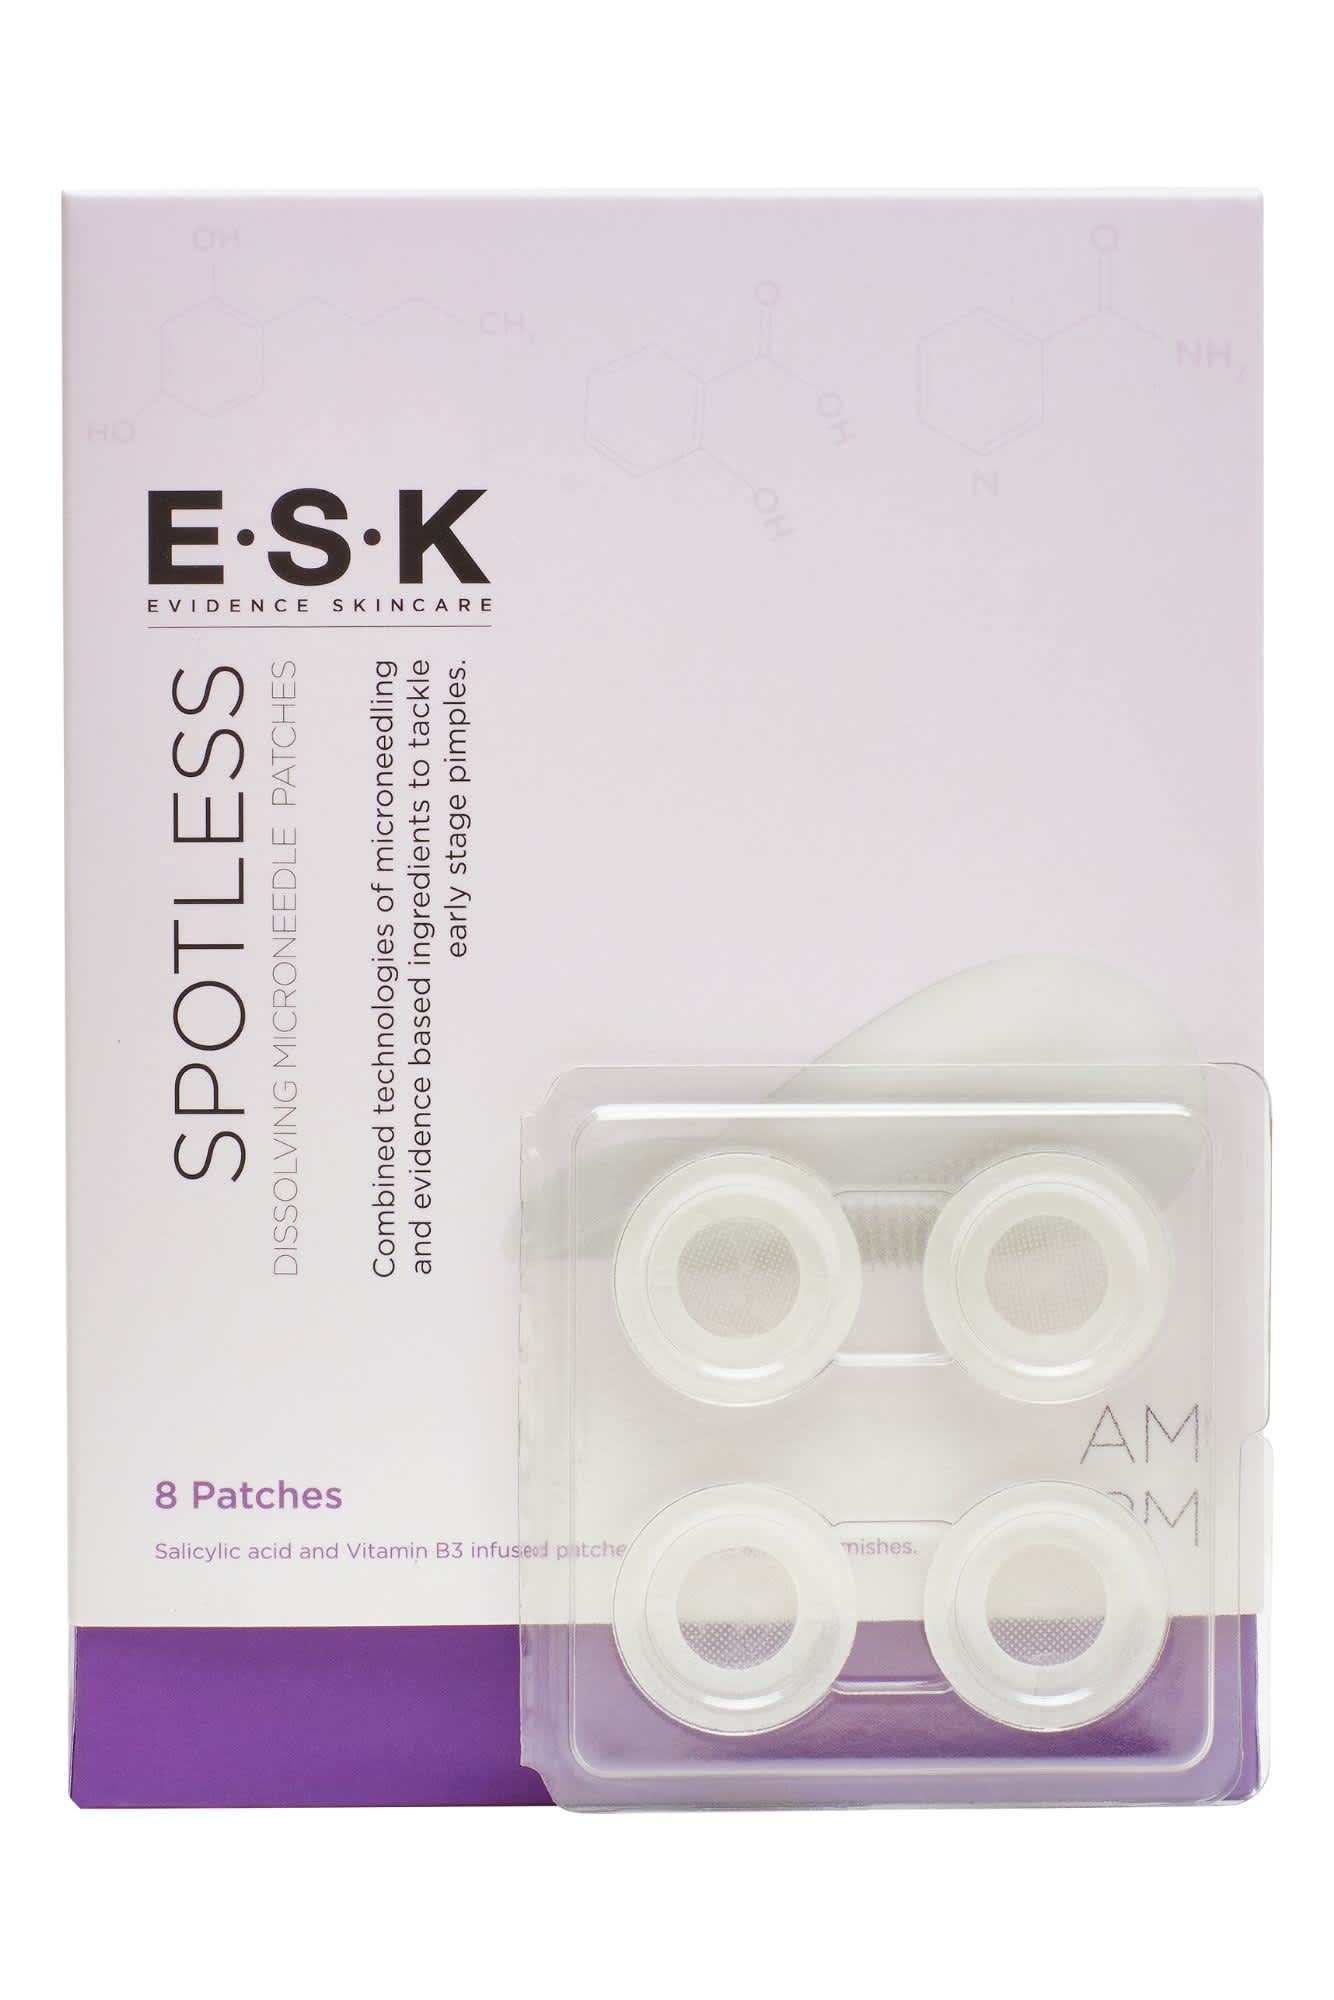 E.S.K, Spotless: Microneedle Patches ($36) 